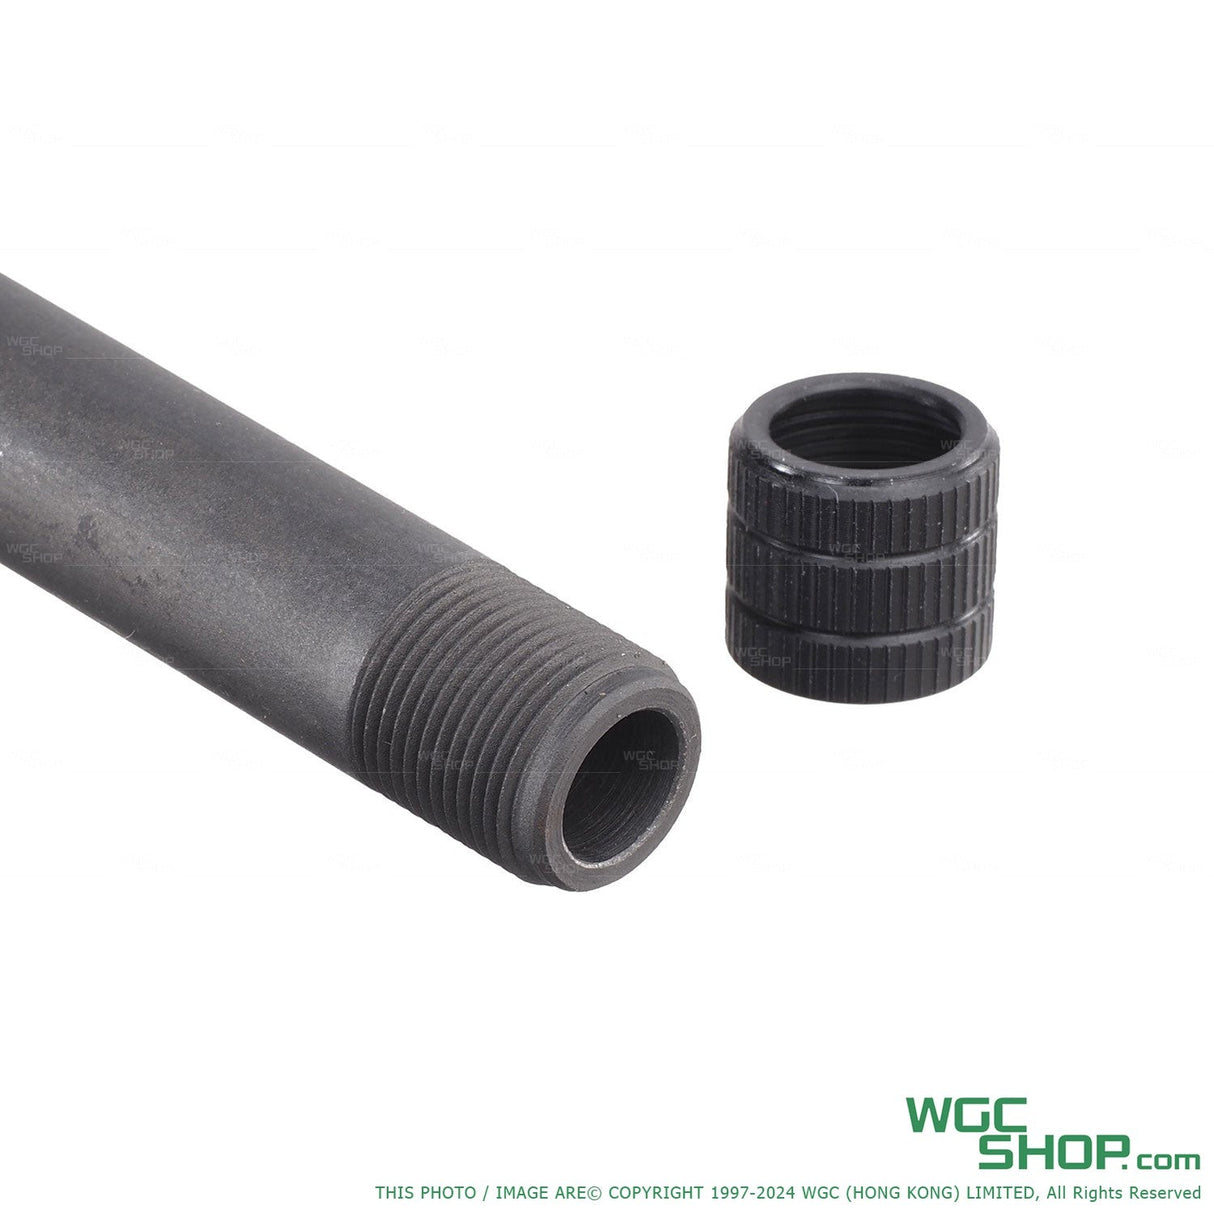 GUNDAY Steel Threaded Outer Barrel for SIG AIR / VFC P320 M17 GBB Airsoft